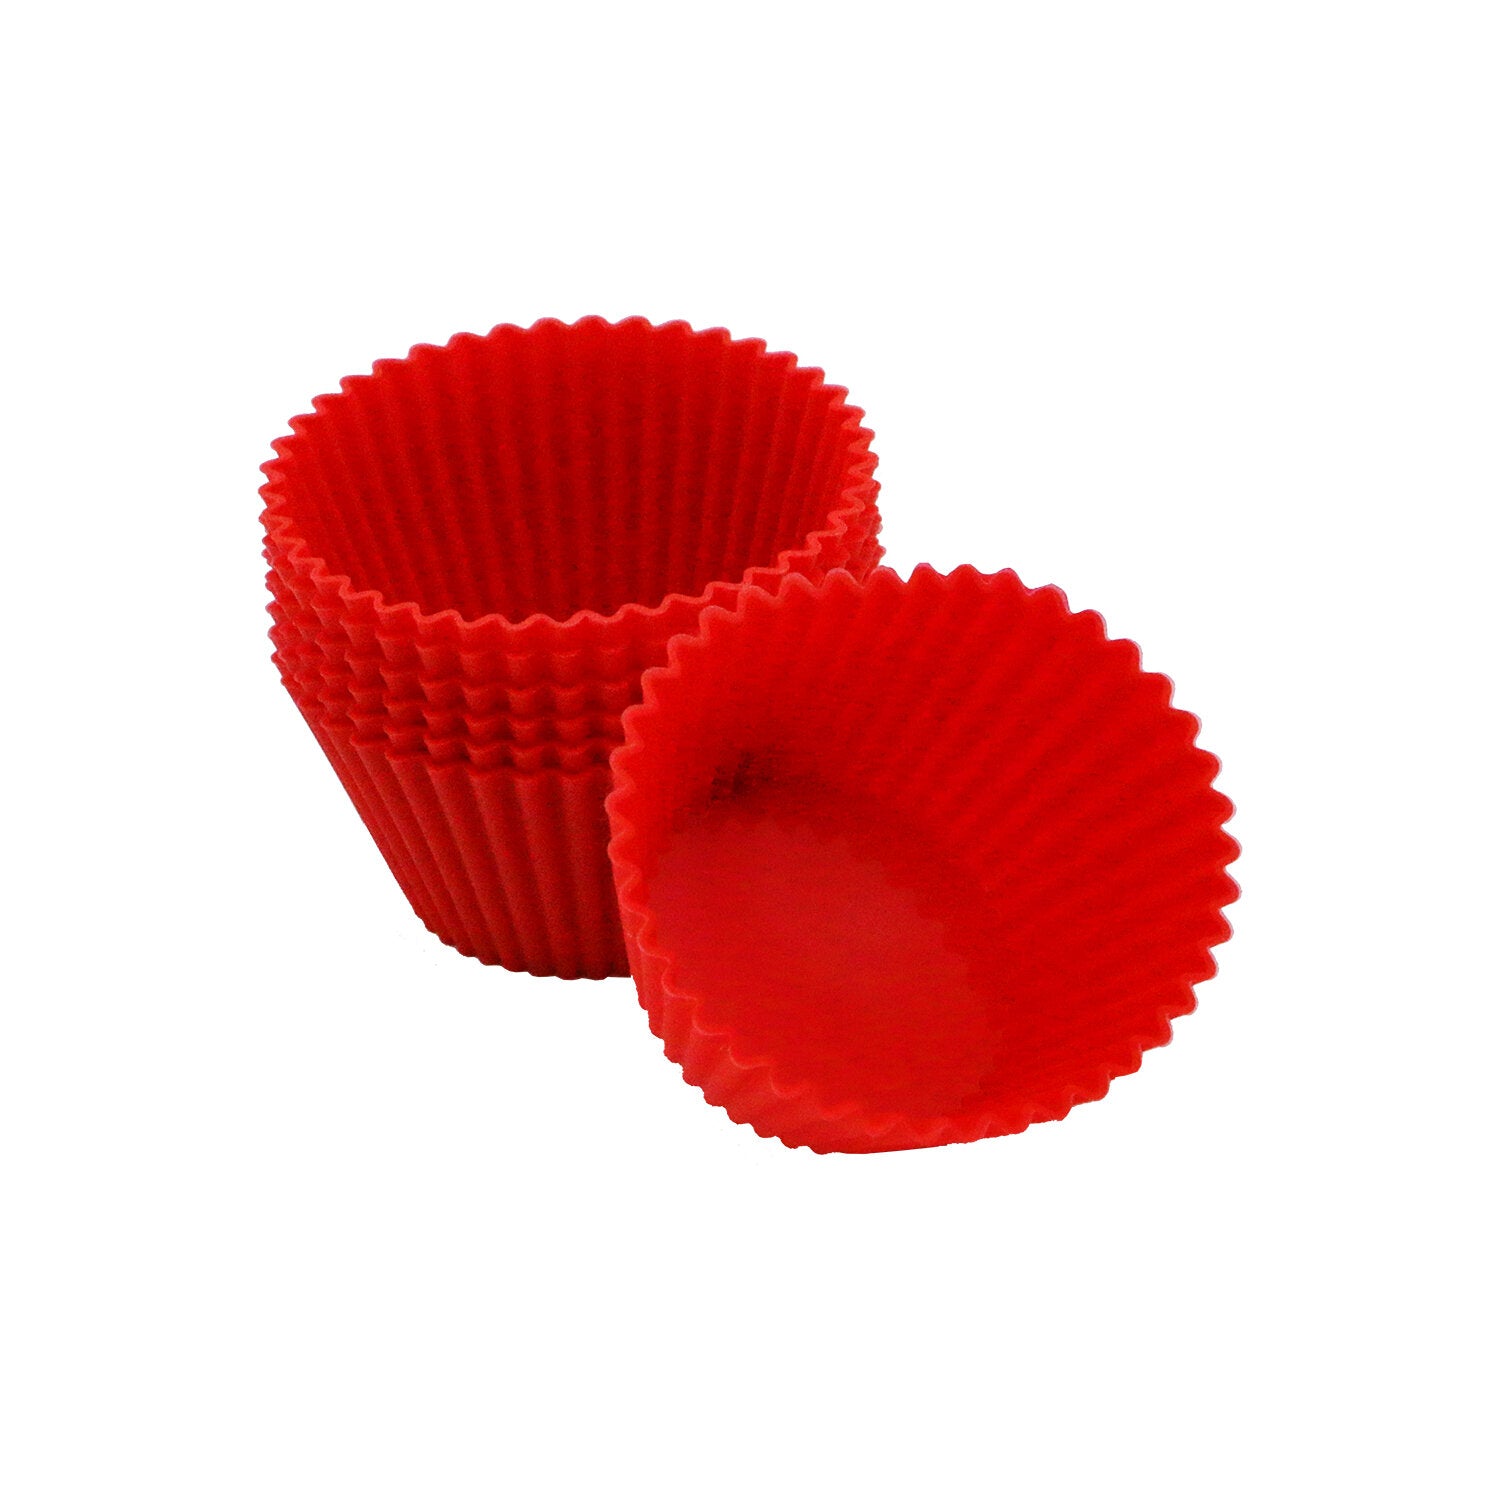 12 Reusable Silicone Baking Cups Cupcake Liners--Vibrant, Flexible Molds